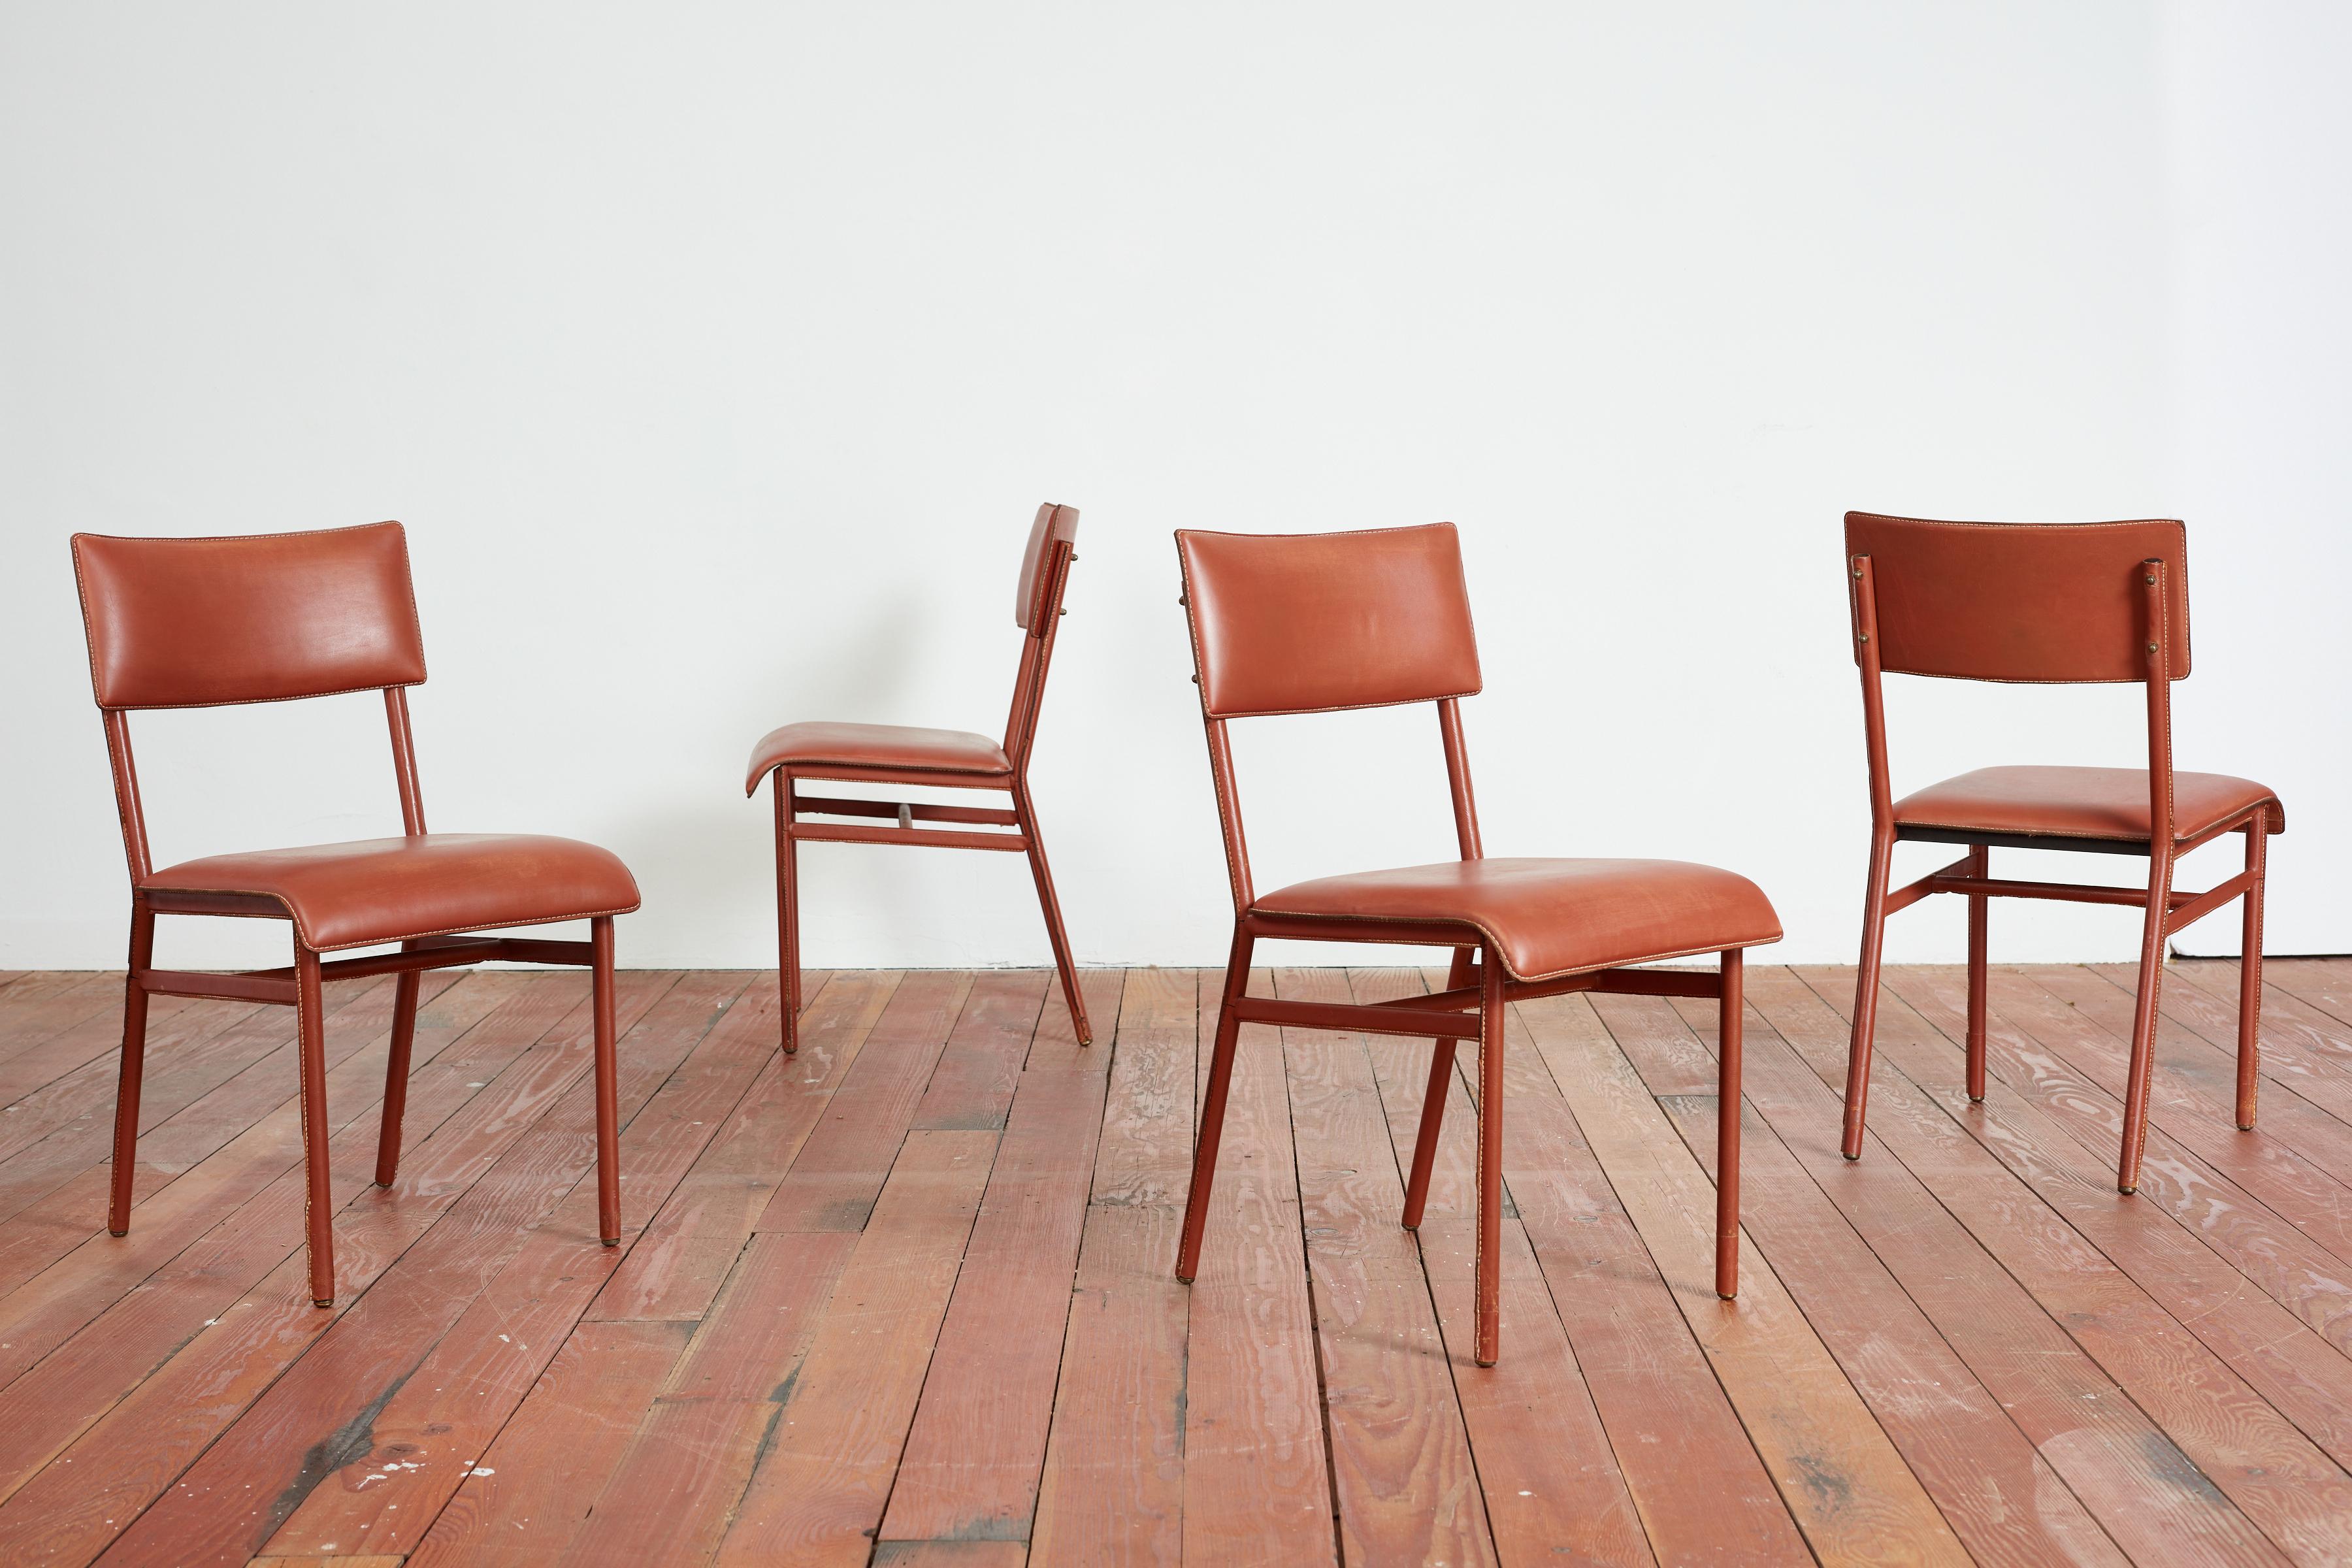 Rare set of 4x Jacques Adnet Dining Room Chairs, France 1940s
Leather is original on legs and newly upholstered seats and backs to match patina. 
Brass accents with signature contrast stitching. 
